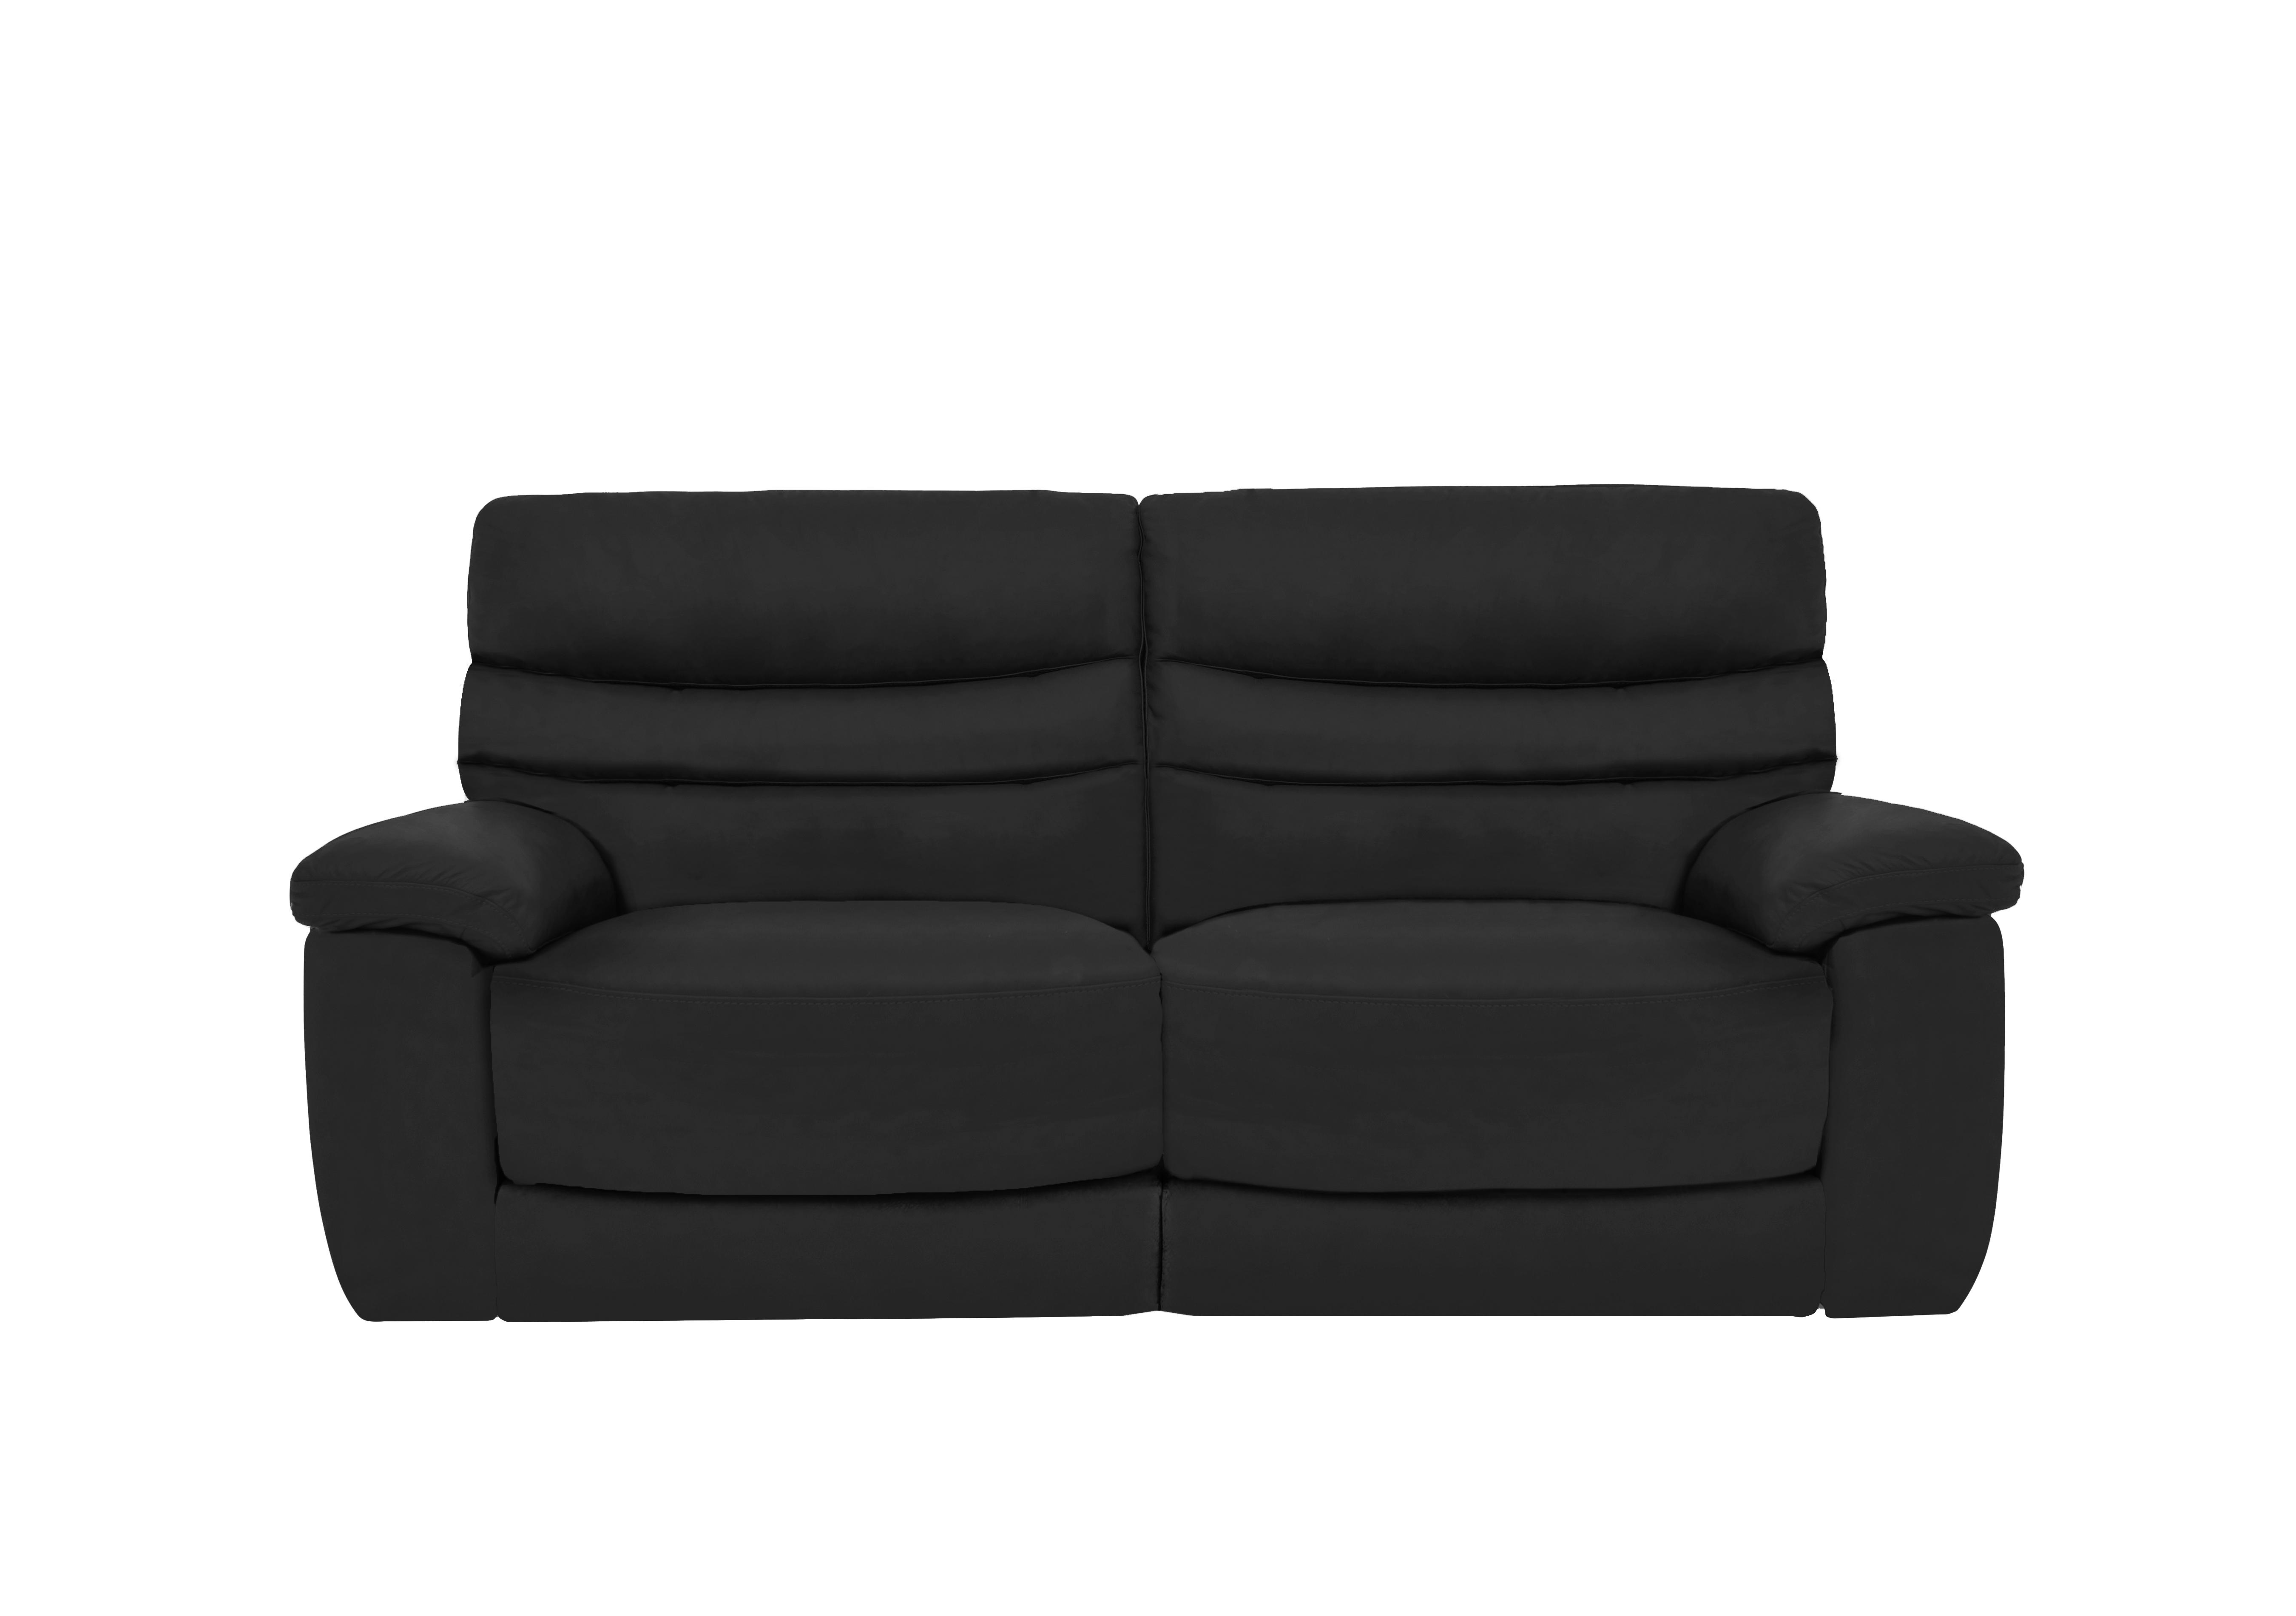 Nimbus 3 Seater Leather Power Recliner Sofa with Power Headrests in Bx-023c Black on Furniture Village